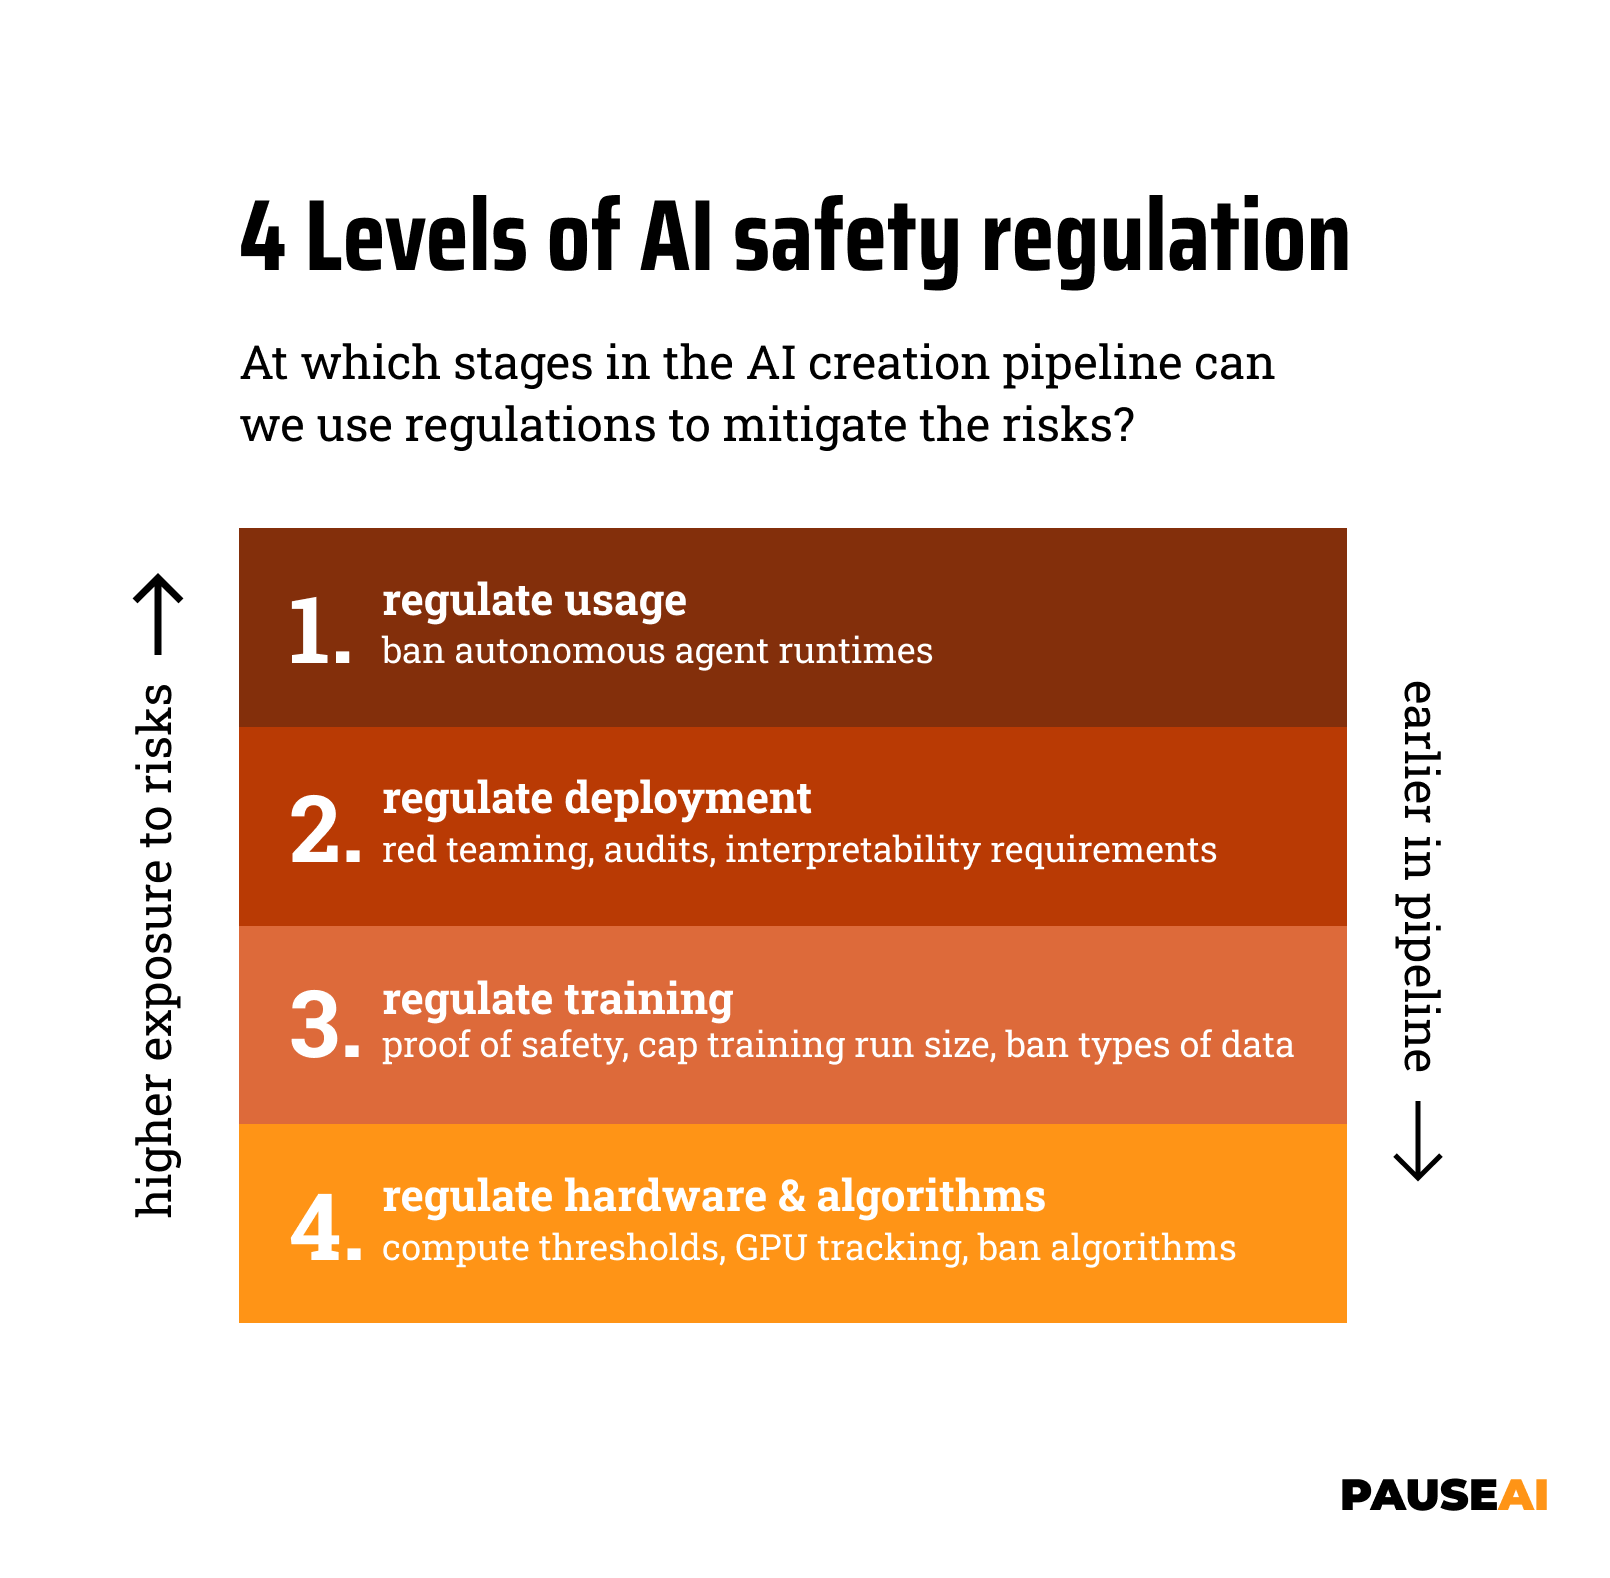 4 Levels of AI safety regulation